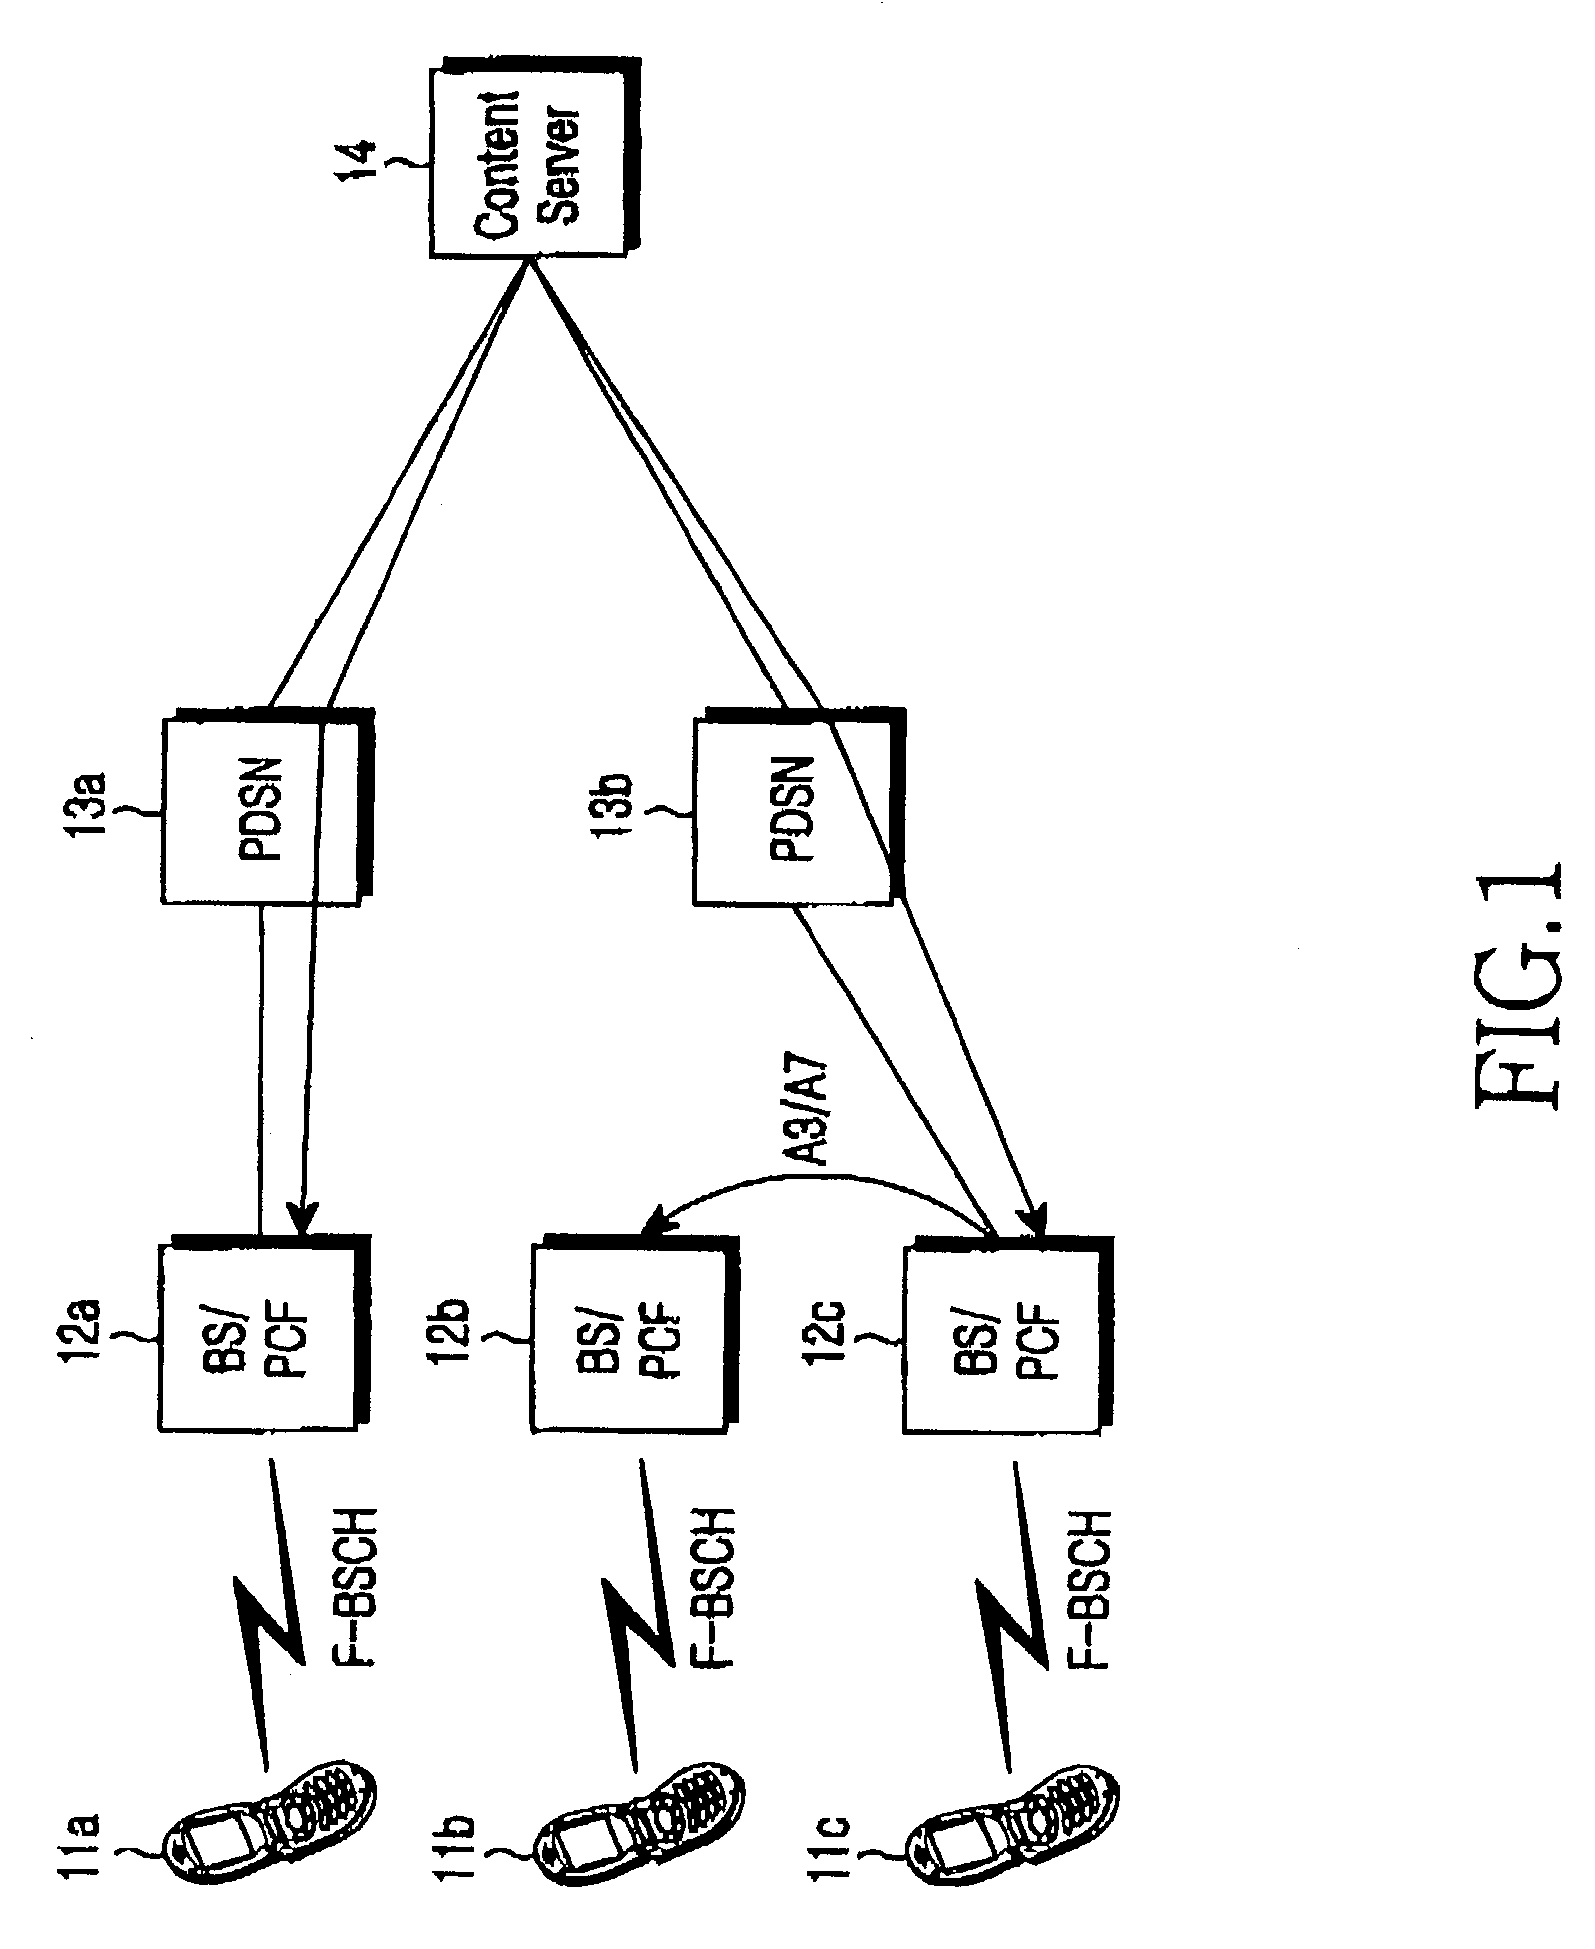 Method for providing broadcast service in a CDMA mobile communication system